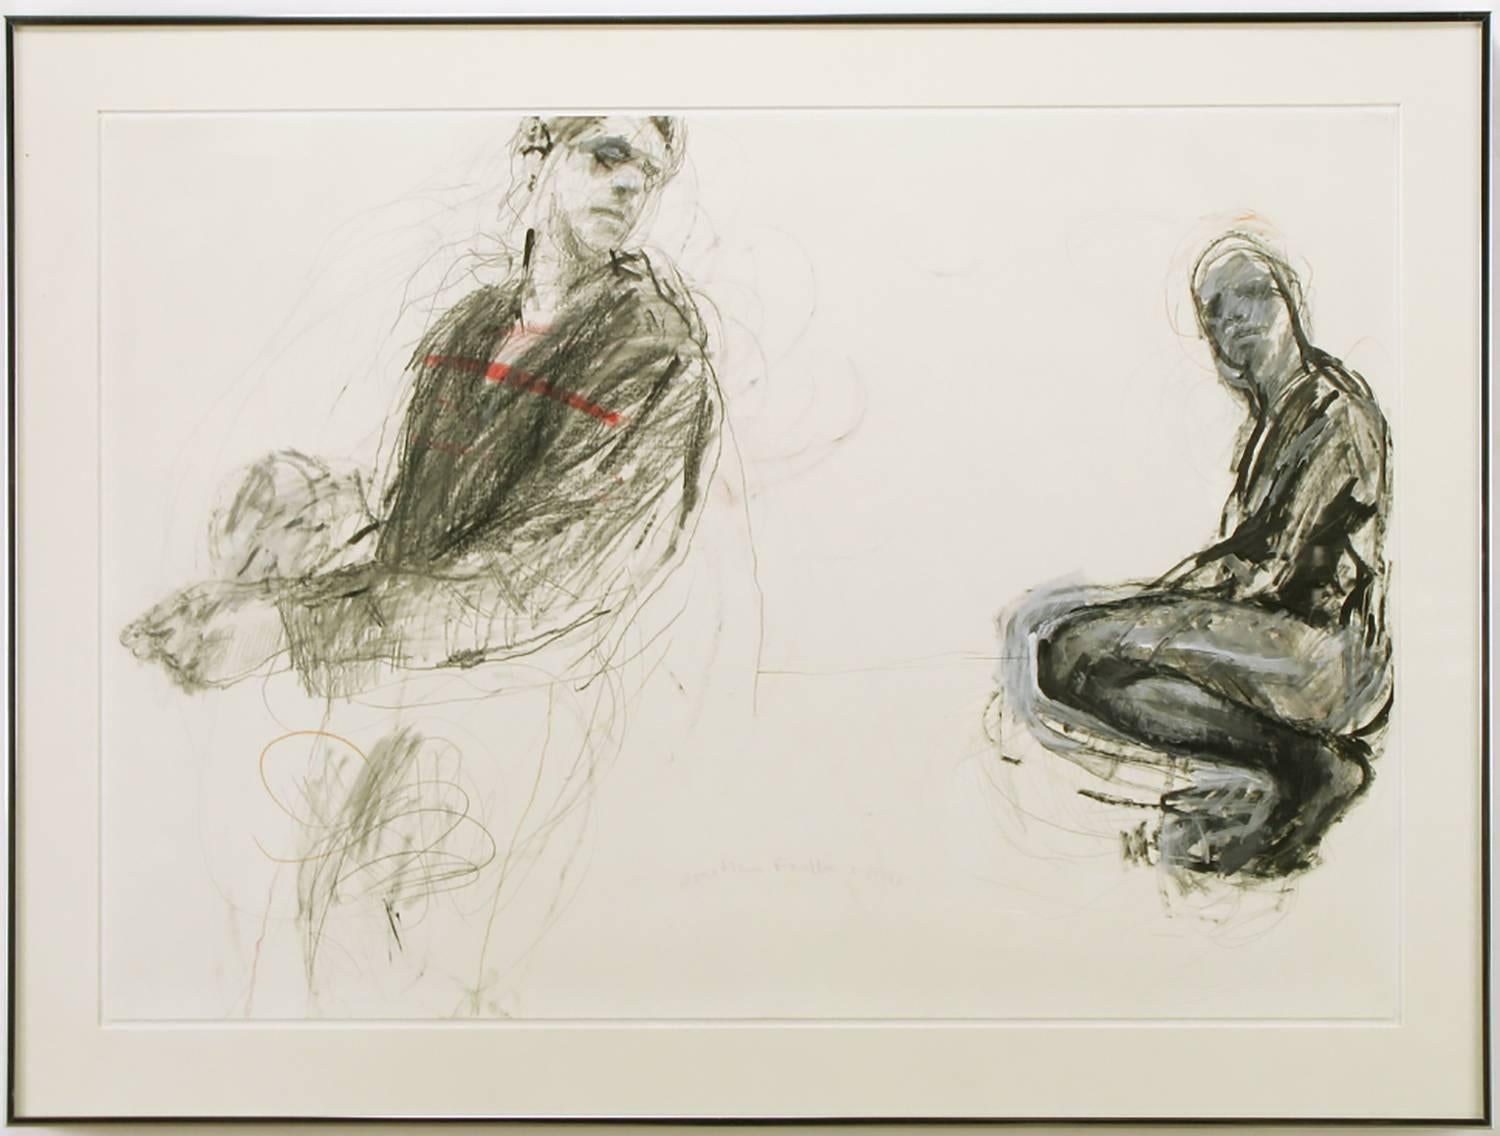 Jonathan Franklin drawing of two figures in graphite and acrylic on paper titled 